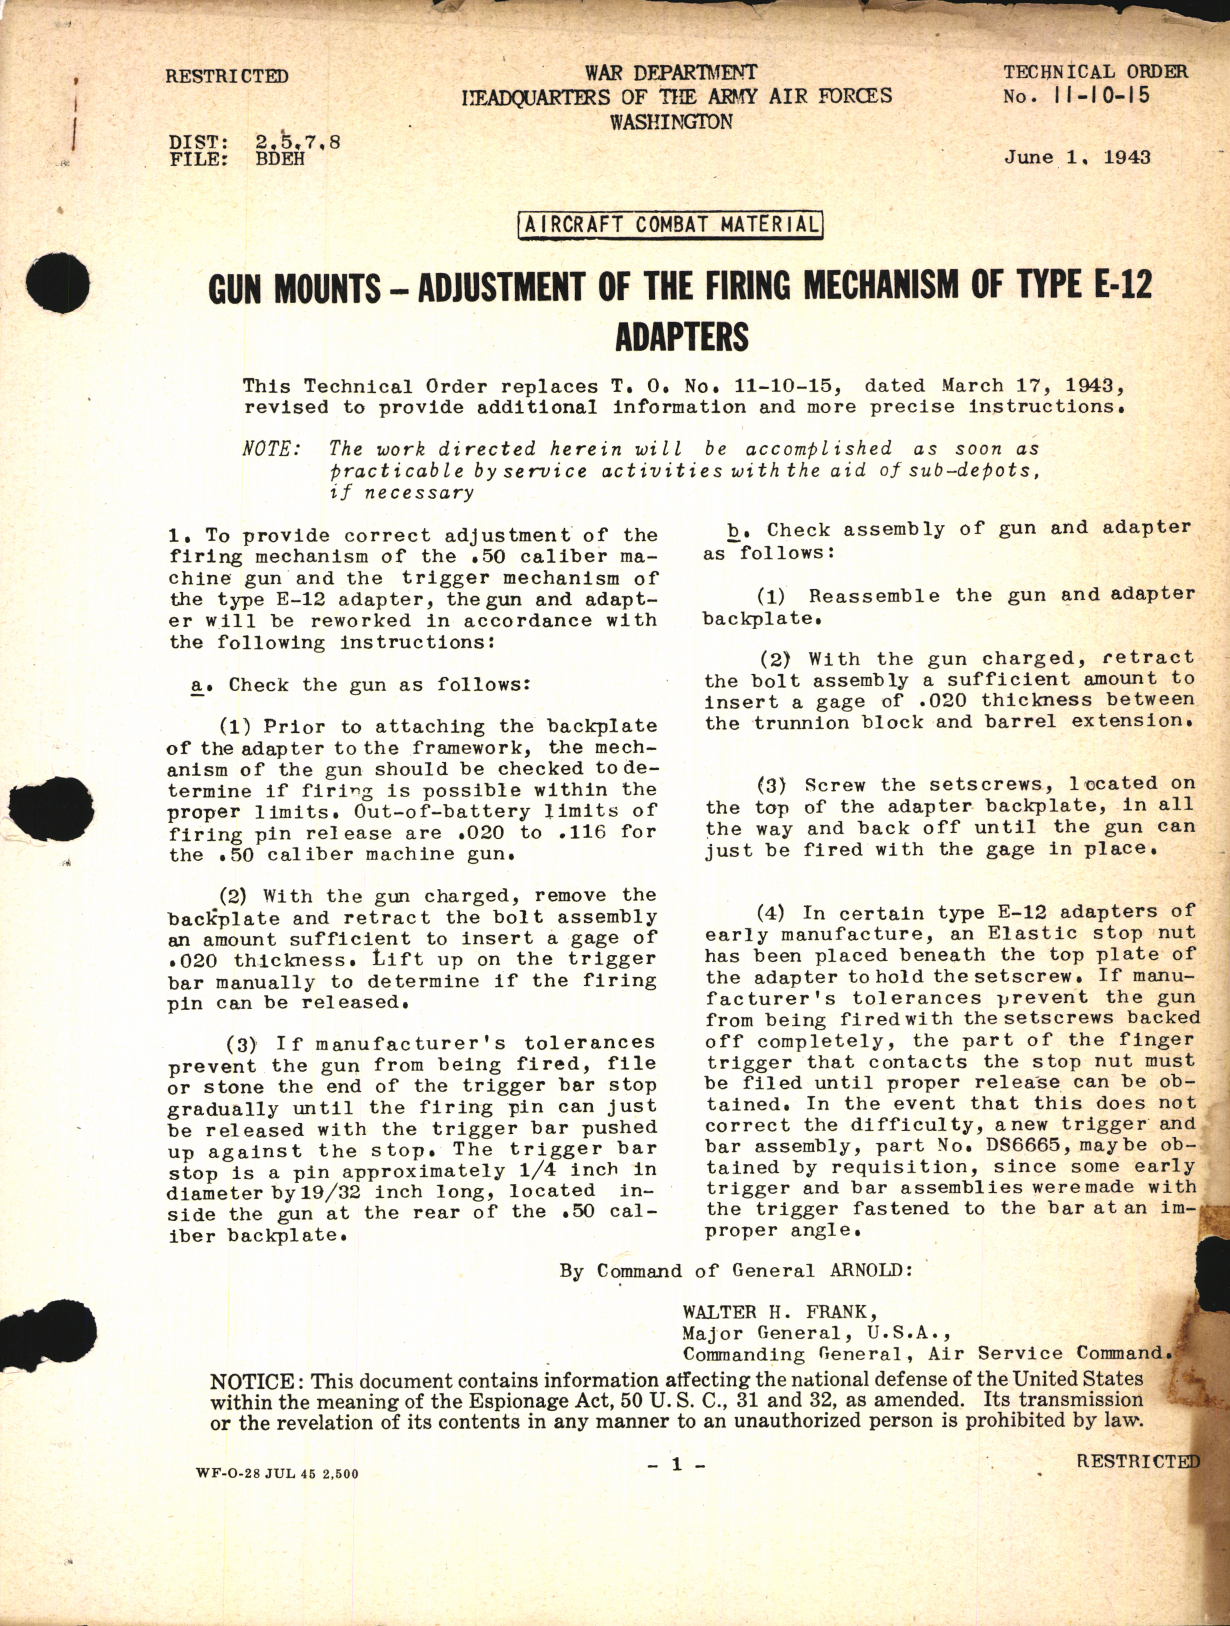 Sample page 1 from AirCorps Library document: Adjustment of the Firing Mechanism for Type E-12 Adapters